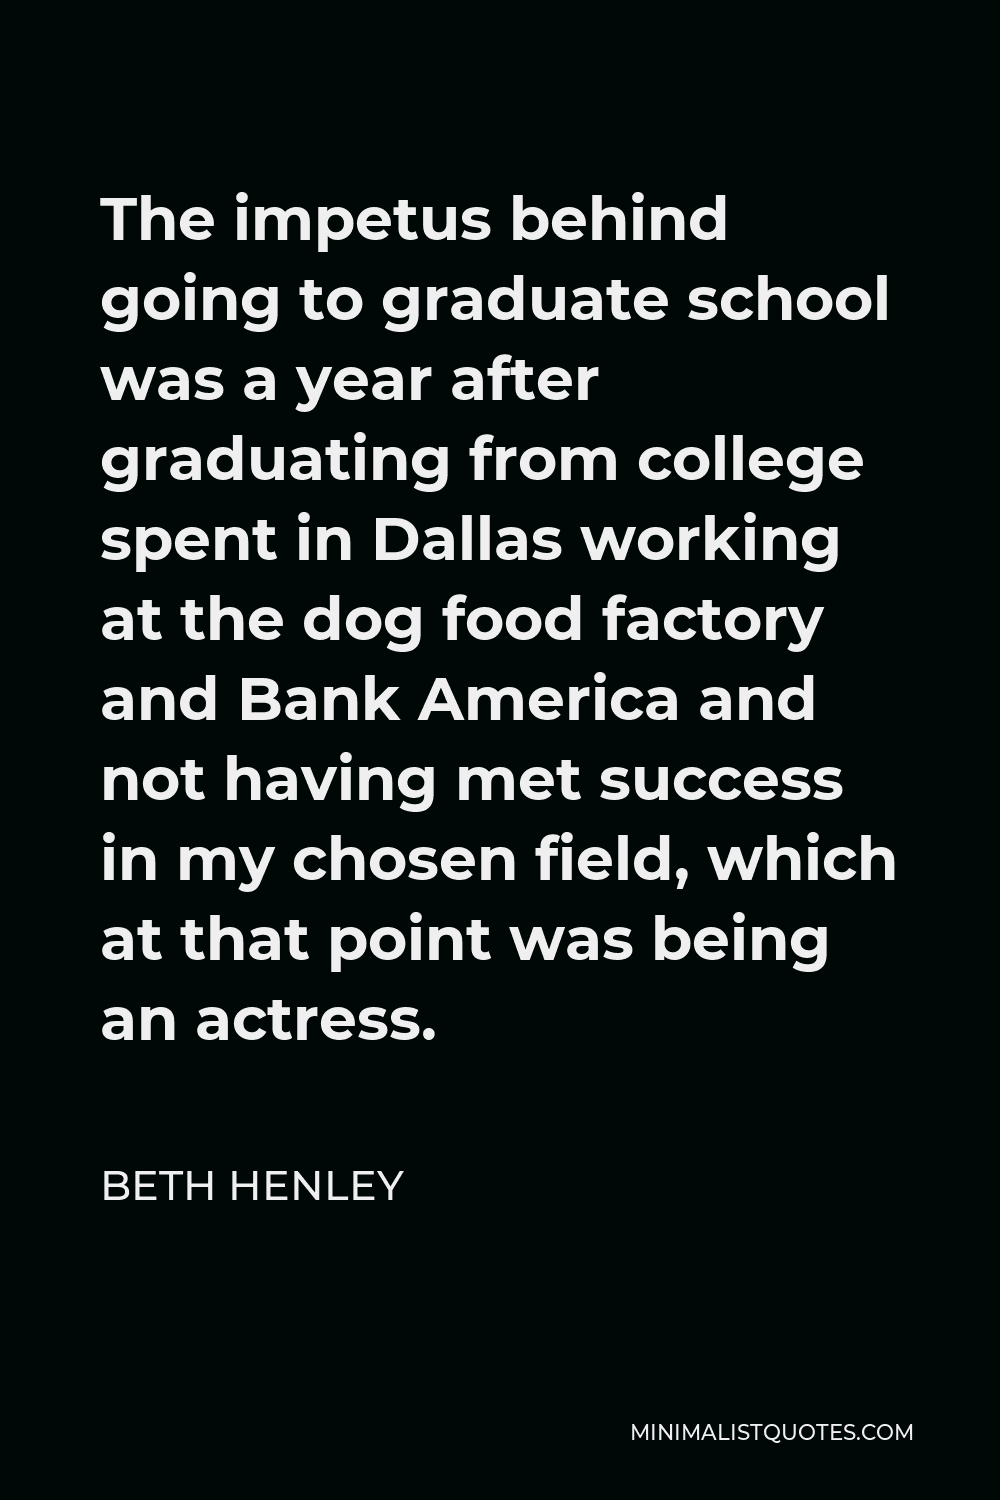 Beth Henley Quote - The impetus behind going to graduate school was a year after graduating from college spent in Dallas working at the dog food factory and Bank America and not having met success in my chosen field, which at that point was being an actress.